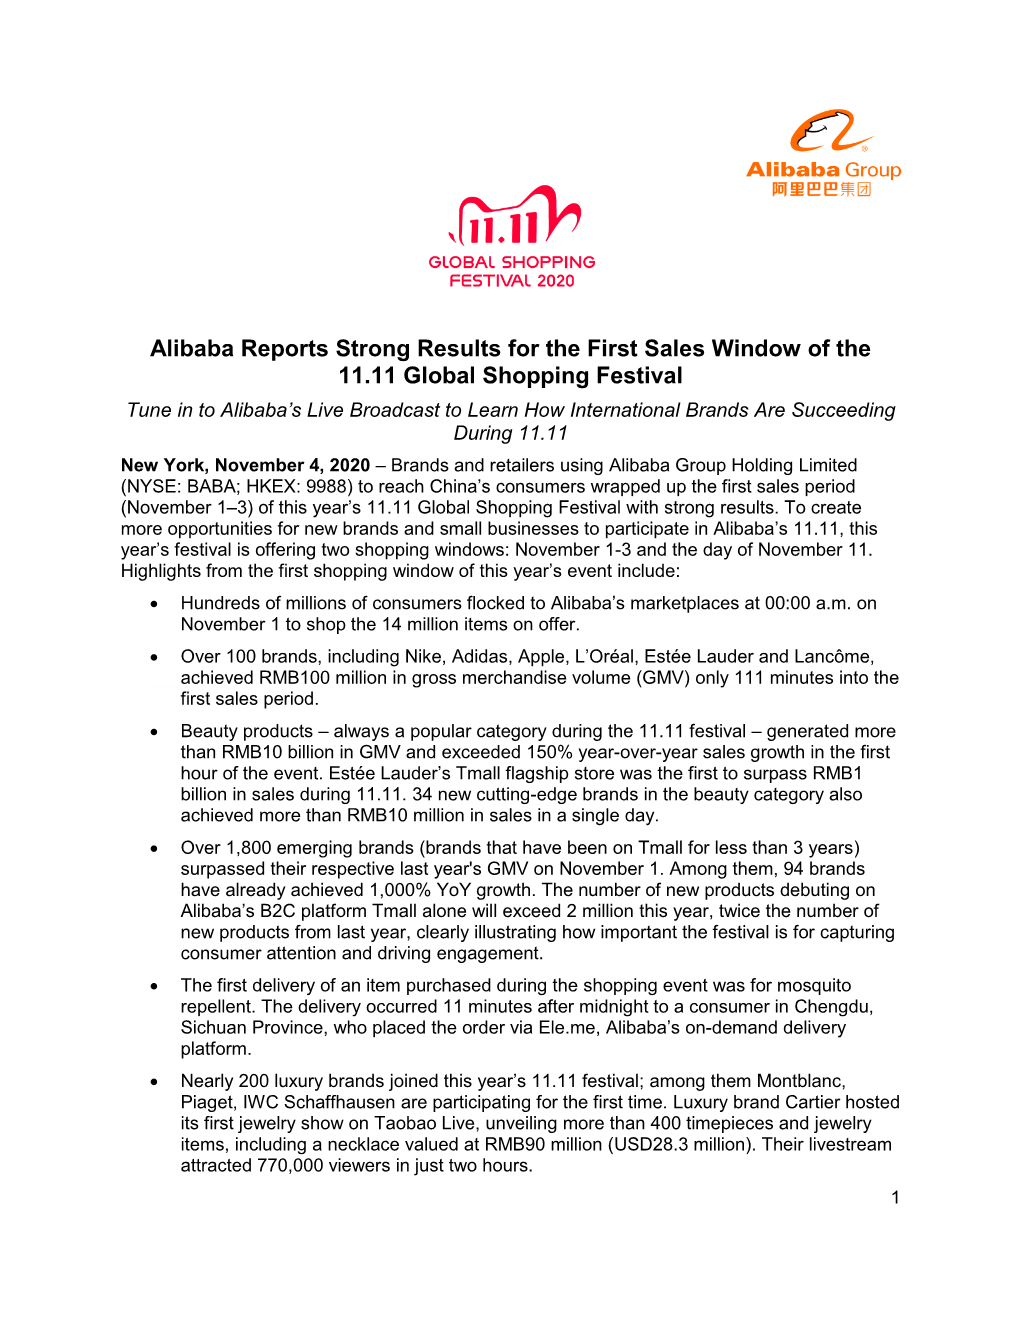 Alibaba Reports Strong Results for the First Sales Window of the 11.11